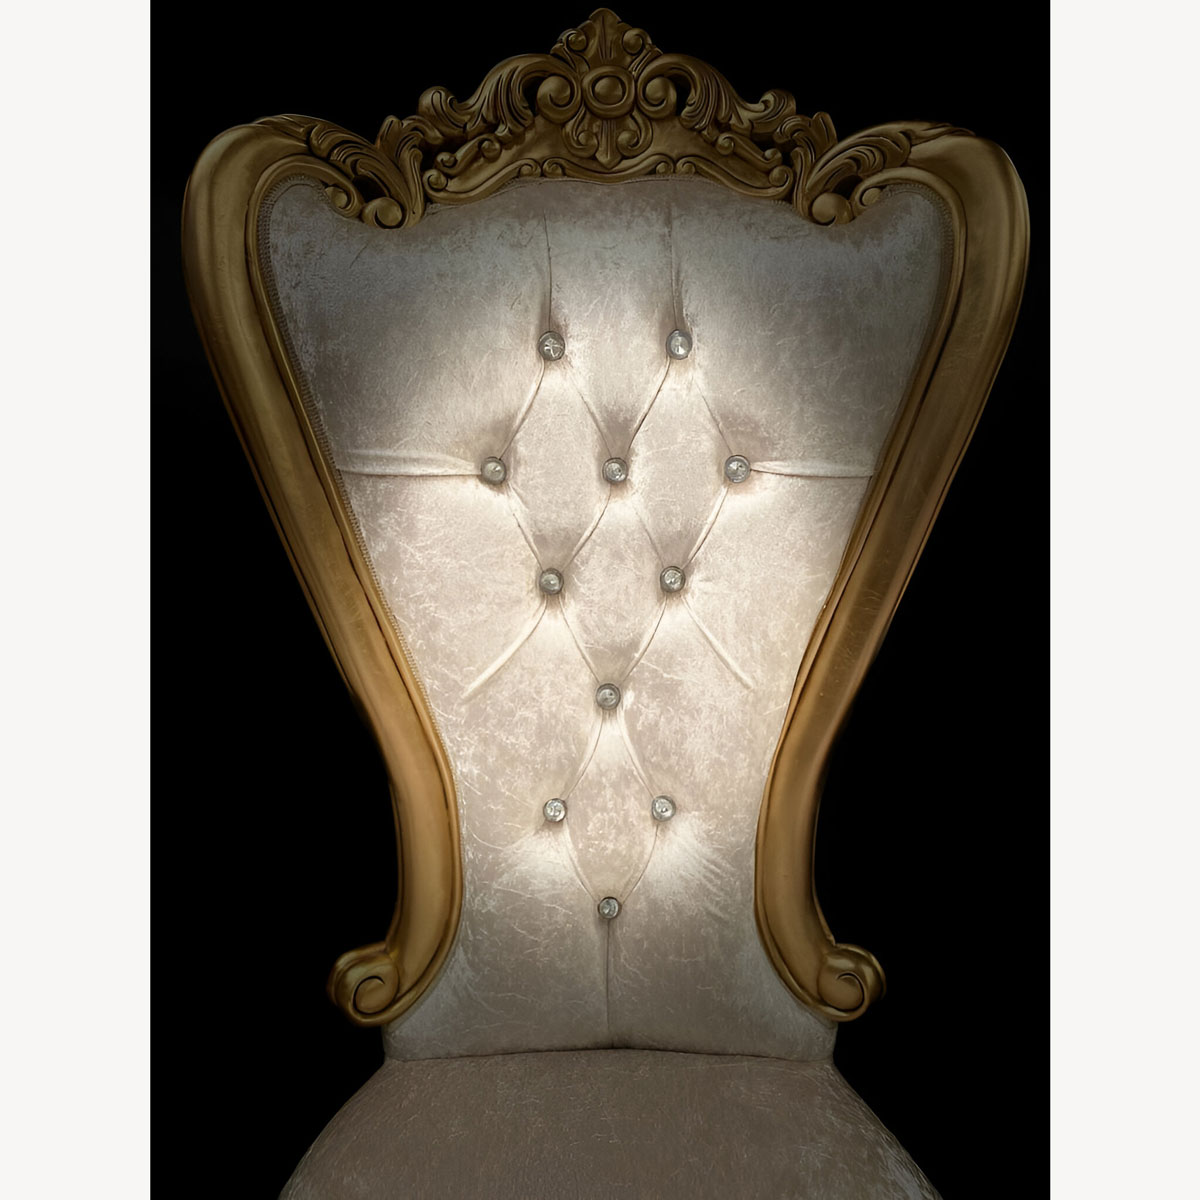 Mayfair Dining Wedding Side Throne In Gold Leaf Frame Upholstered In Ivory Cream Crushed Velvet With Crystal Buttoning 4 - Hampshire Barn Interiors - Mayfair Dining Wedding Side Throne In Gold Leaf Frame Upholstered In Ivory Cream Crushed Velvet With Crystal Buttoning -